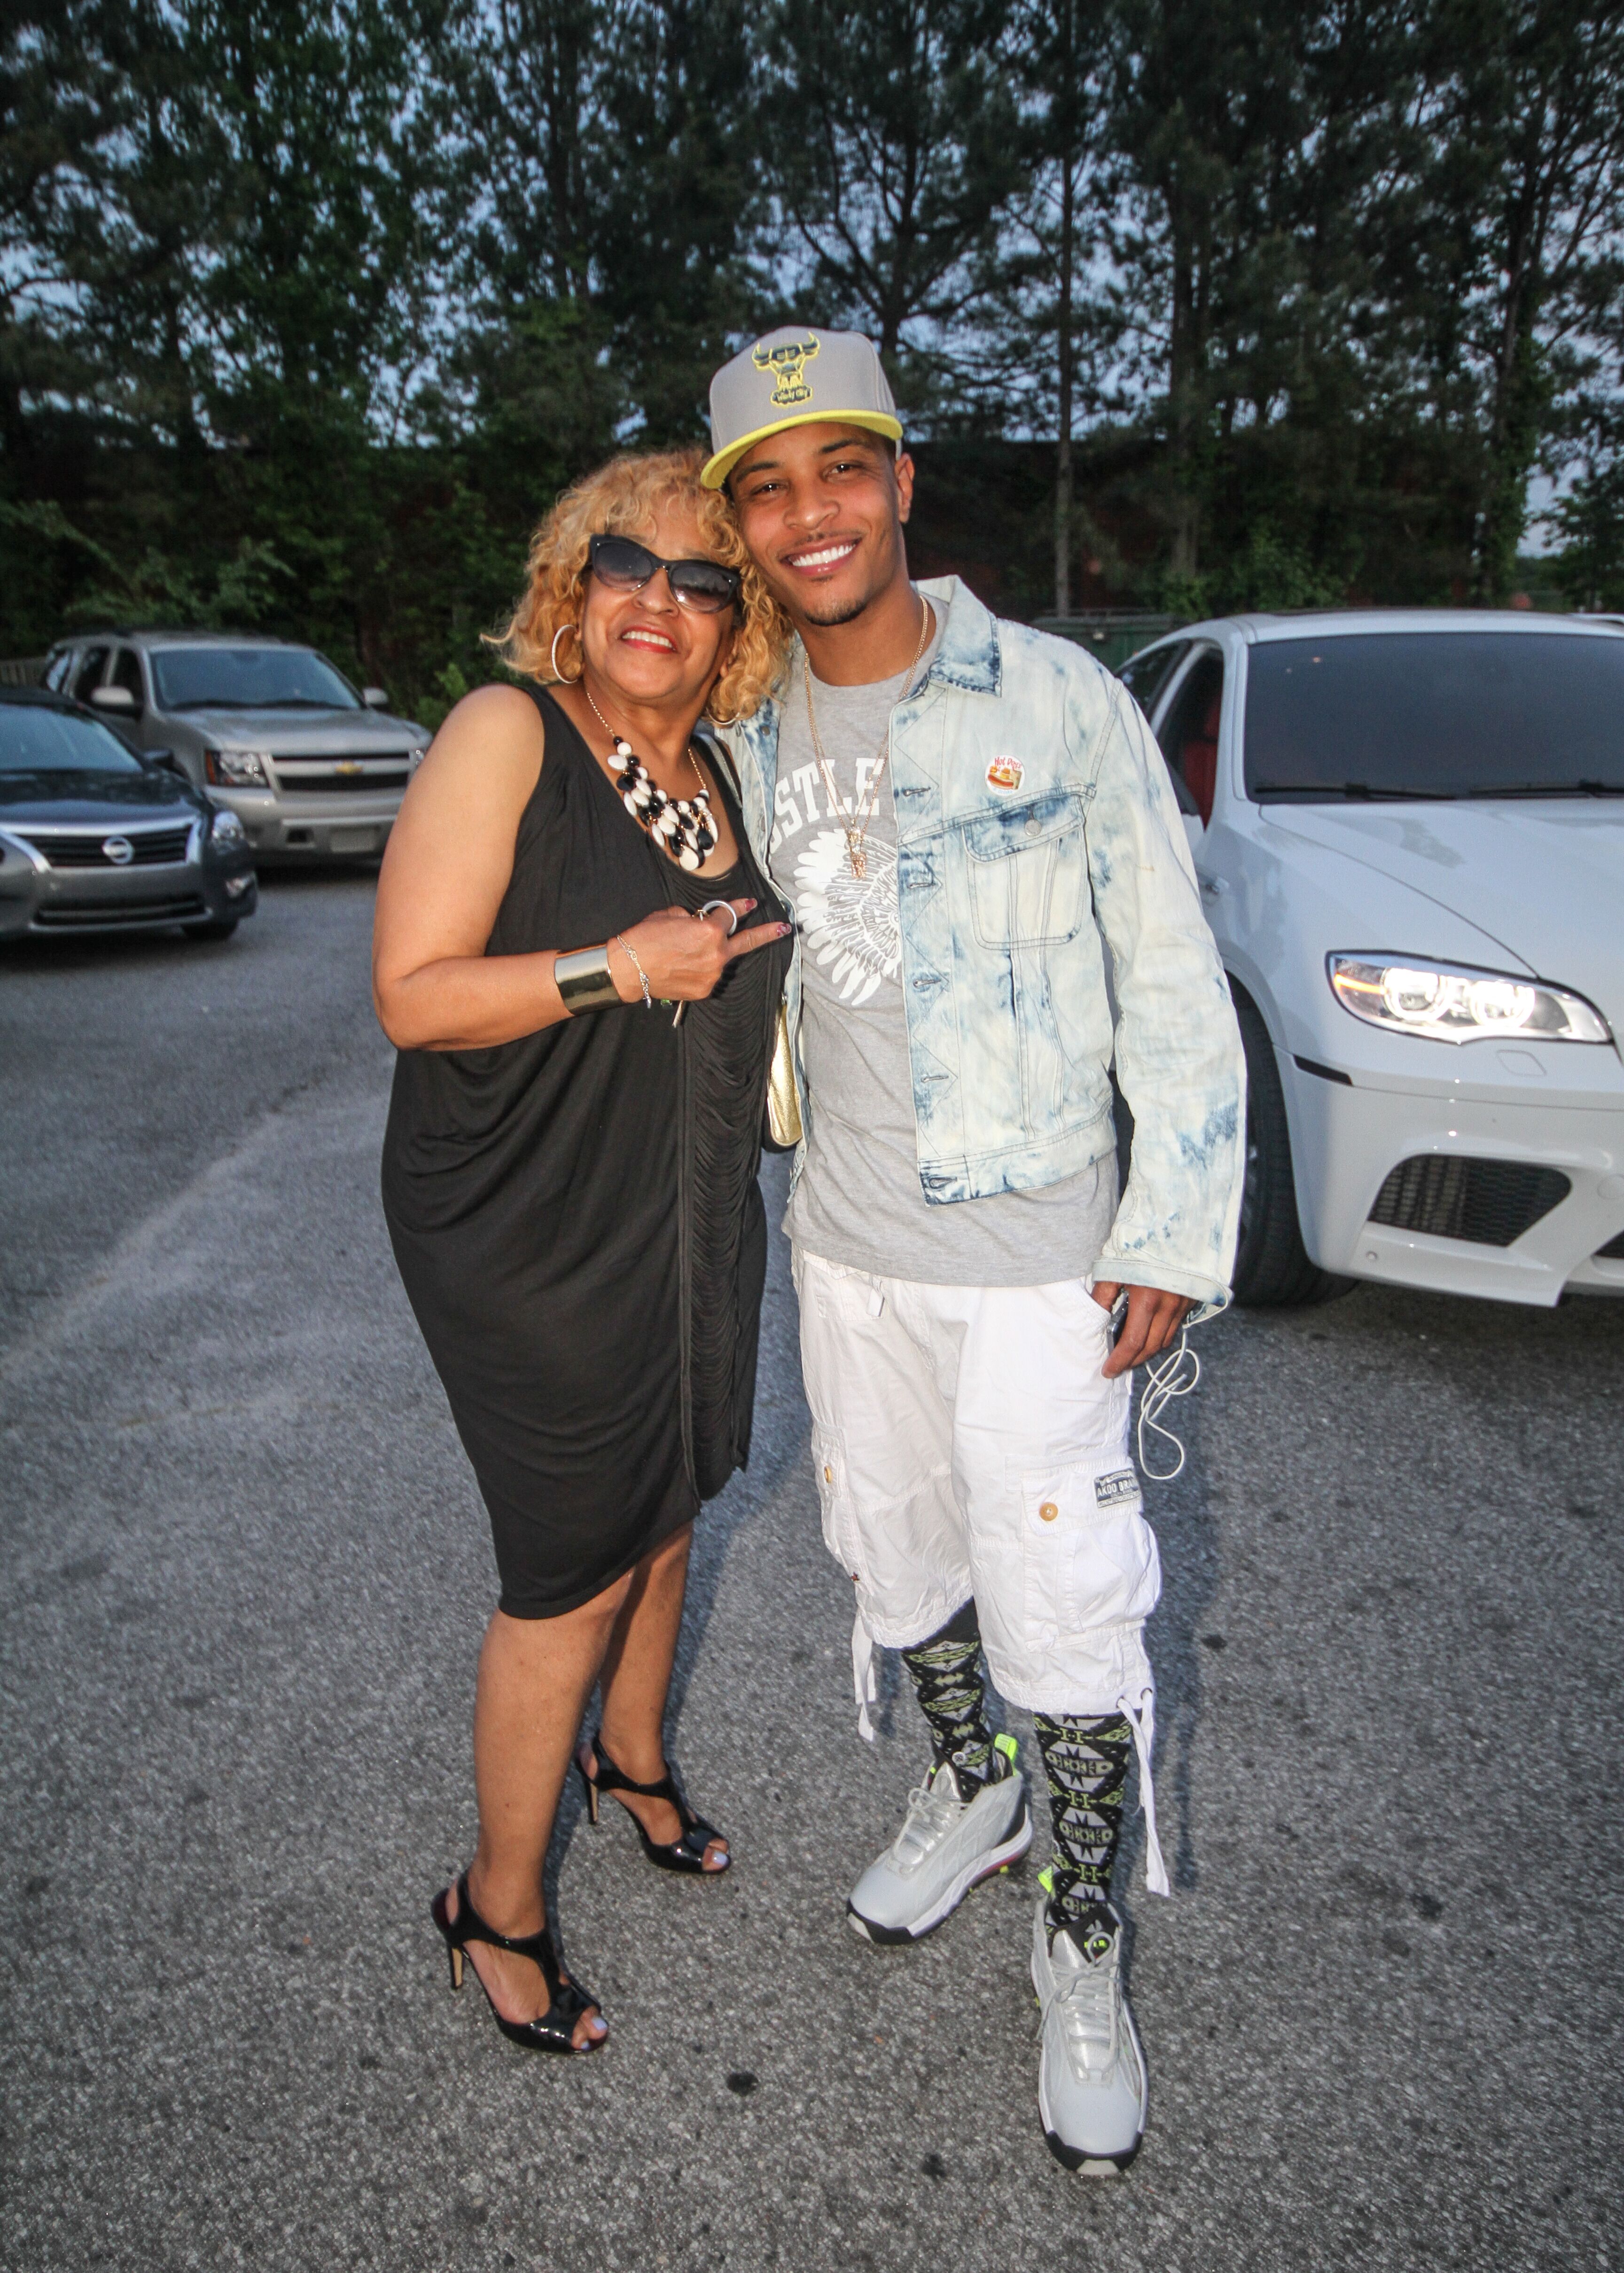 A portrait of T.I. and Precious Harris at parking lot | Source: Getty Images/GlobalImagesUkraine